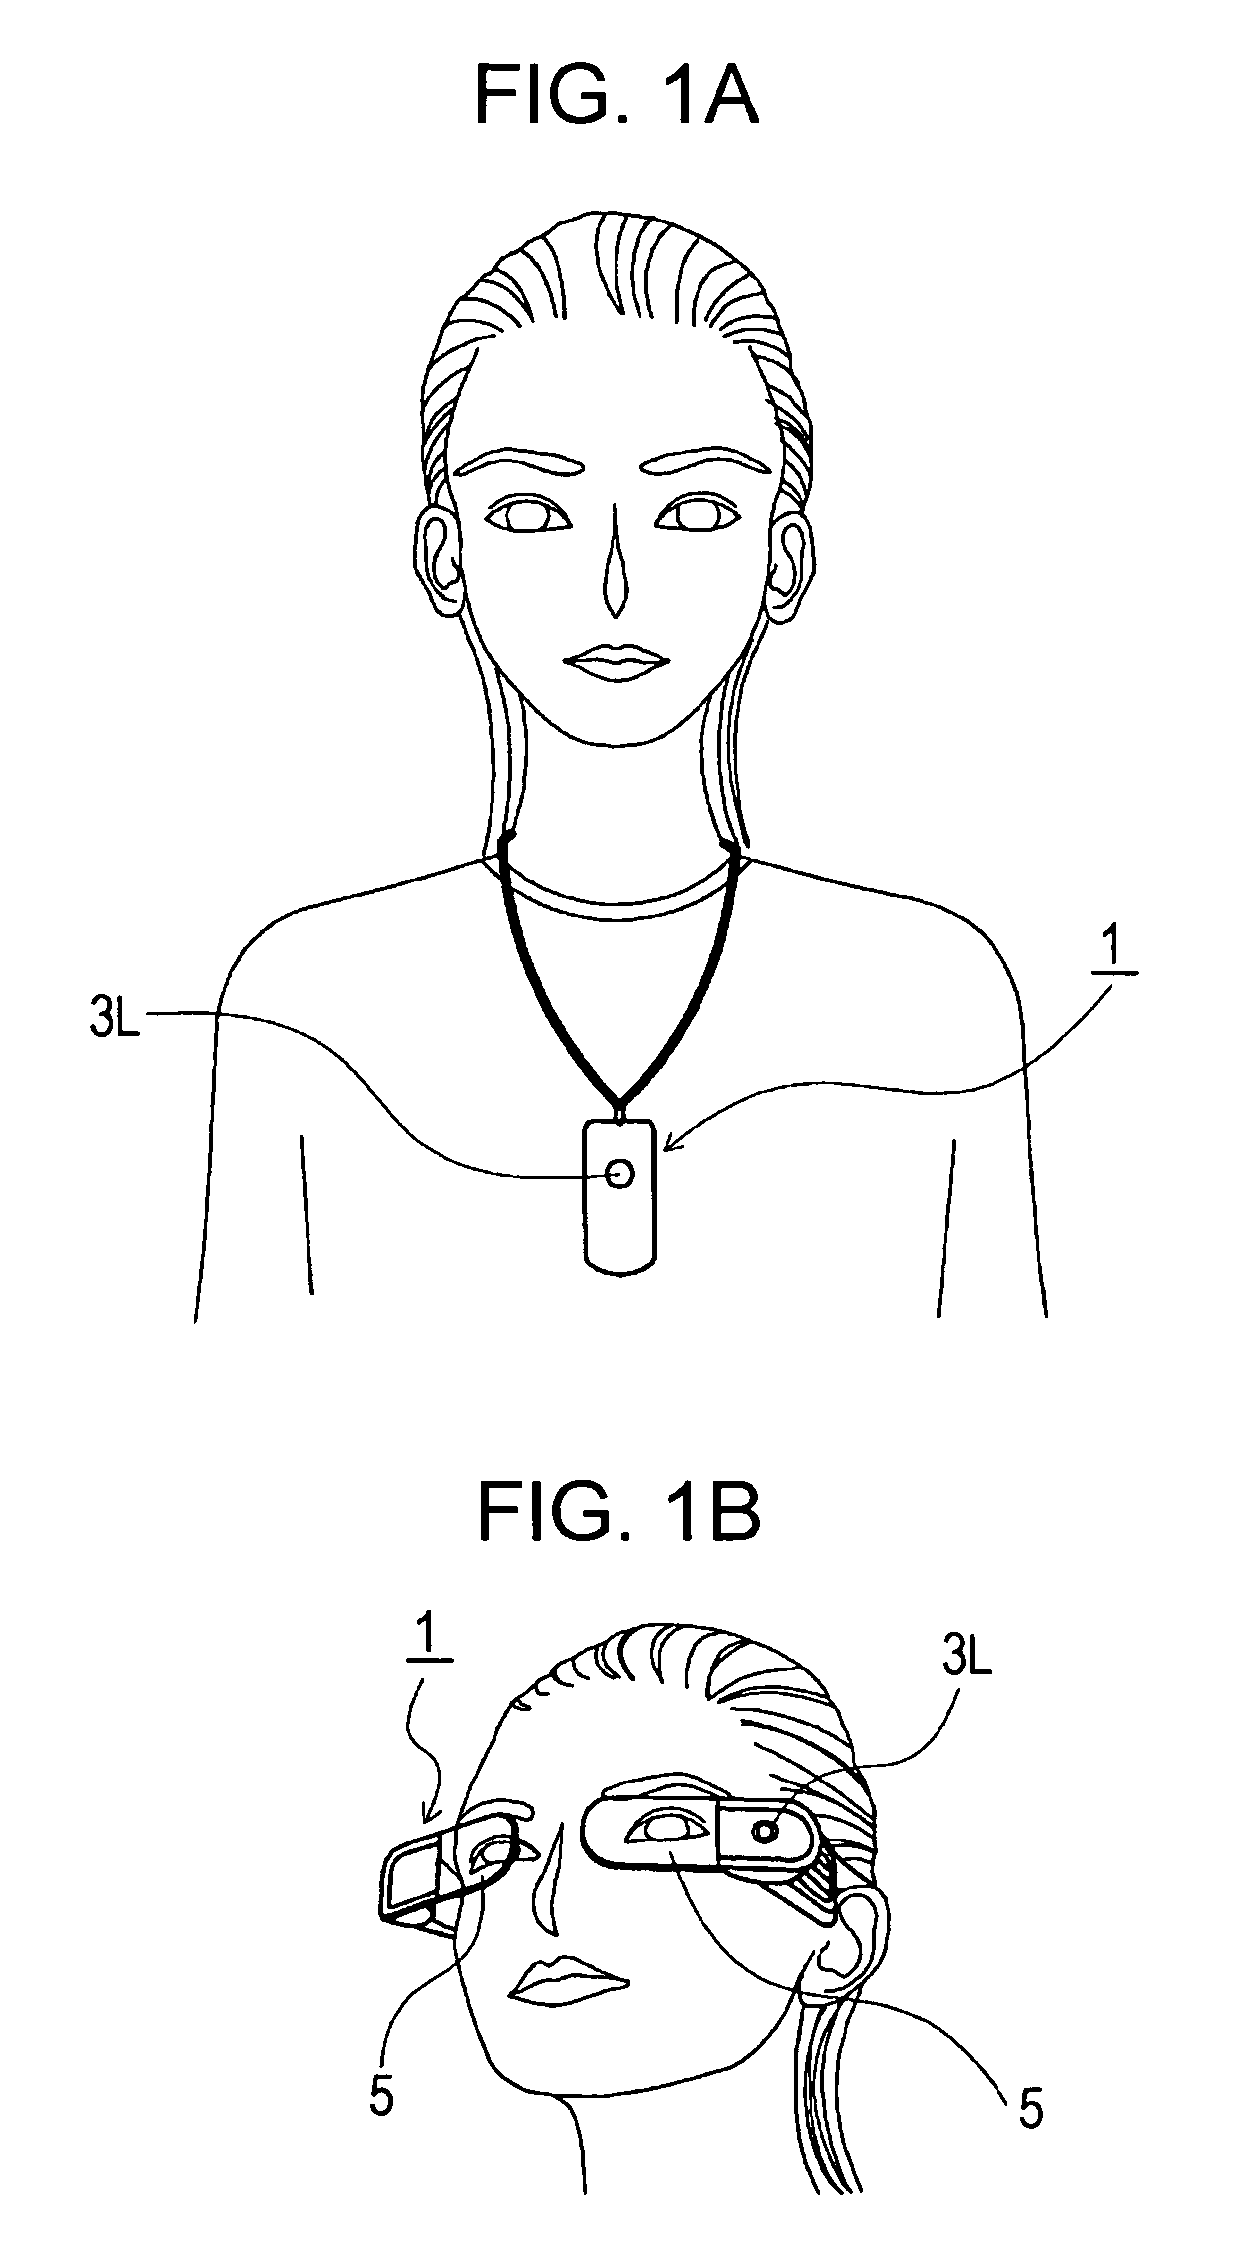 Imaging apparatus that captures an image of a subject